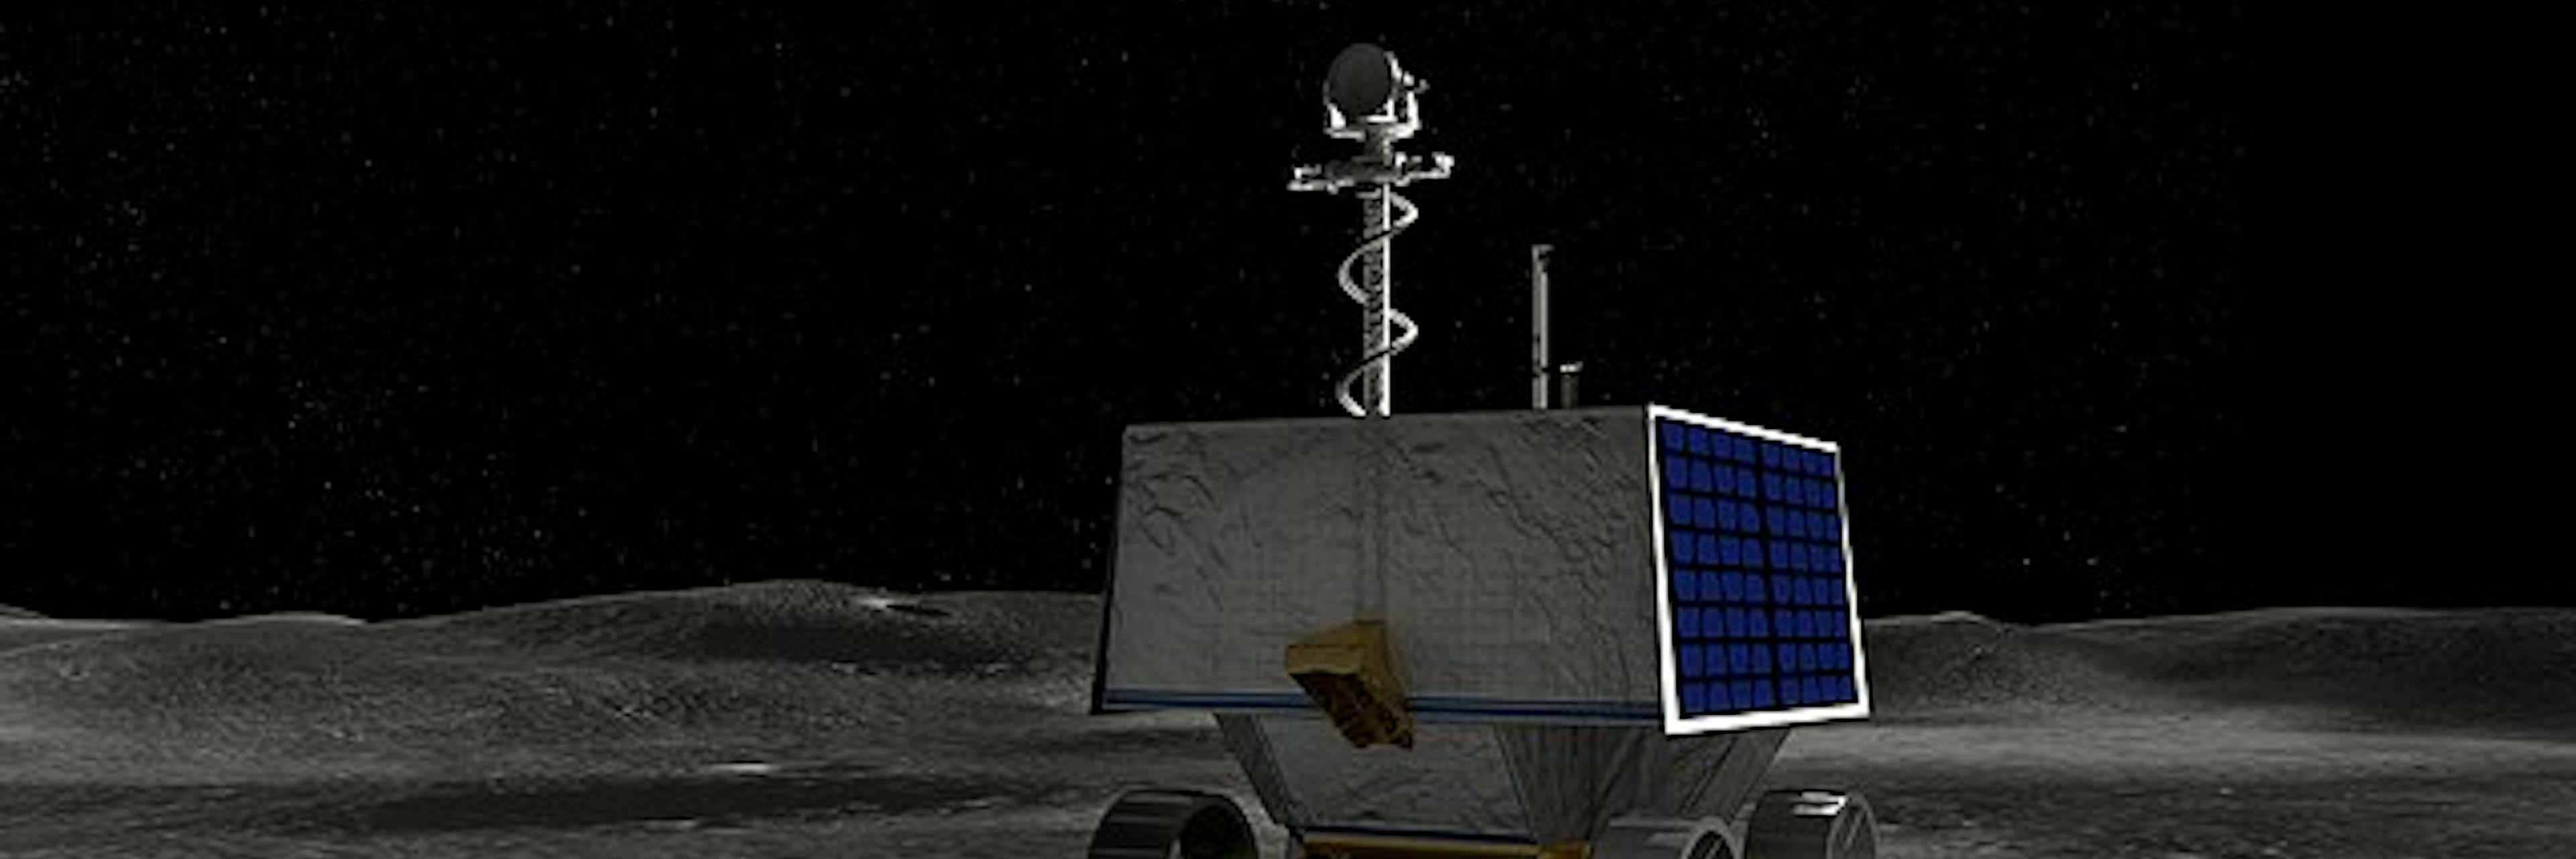 Viper rover on the surface of the moon